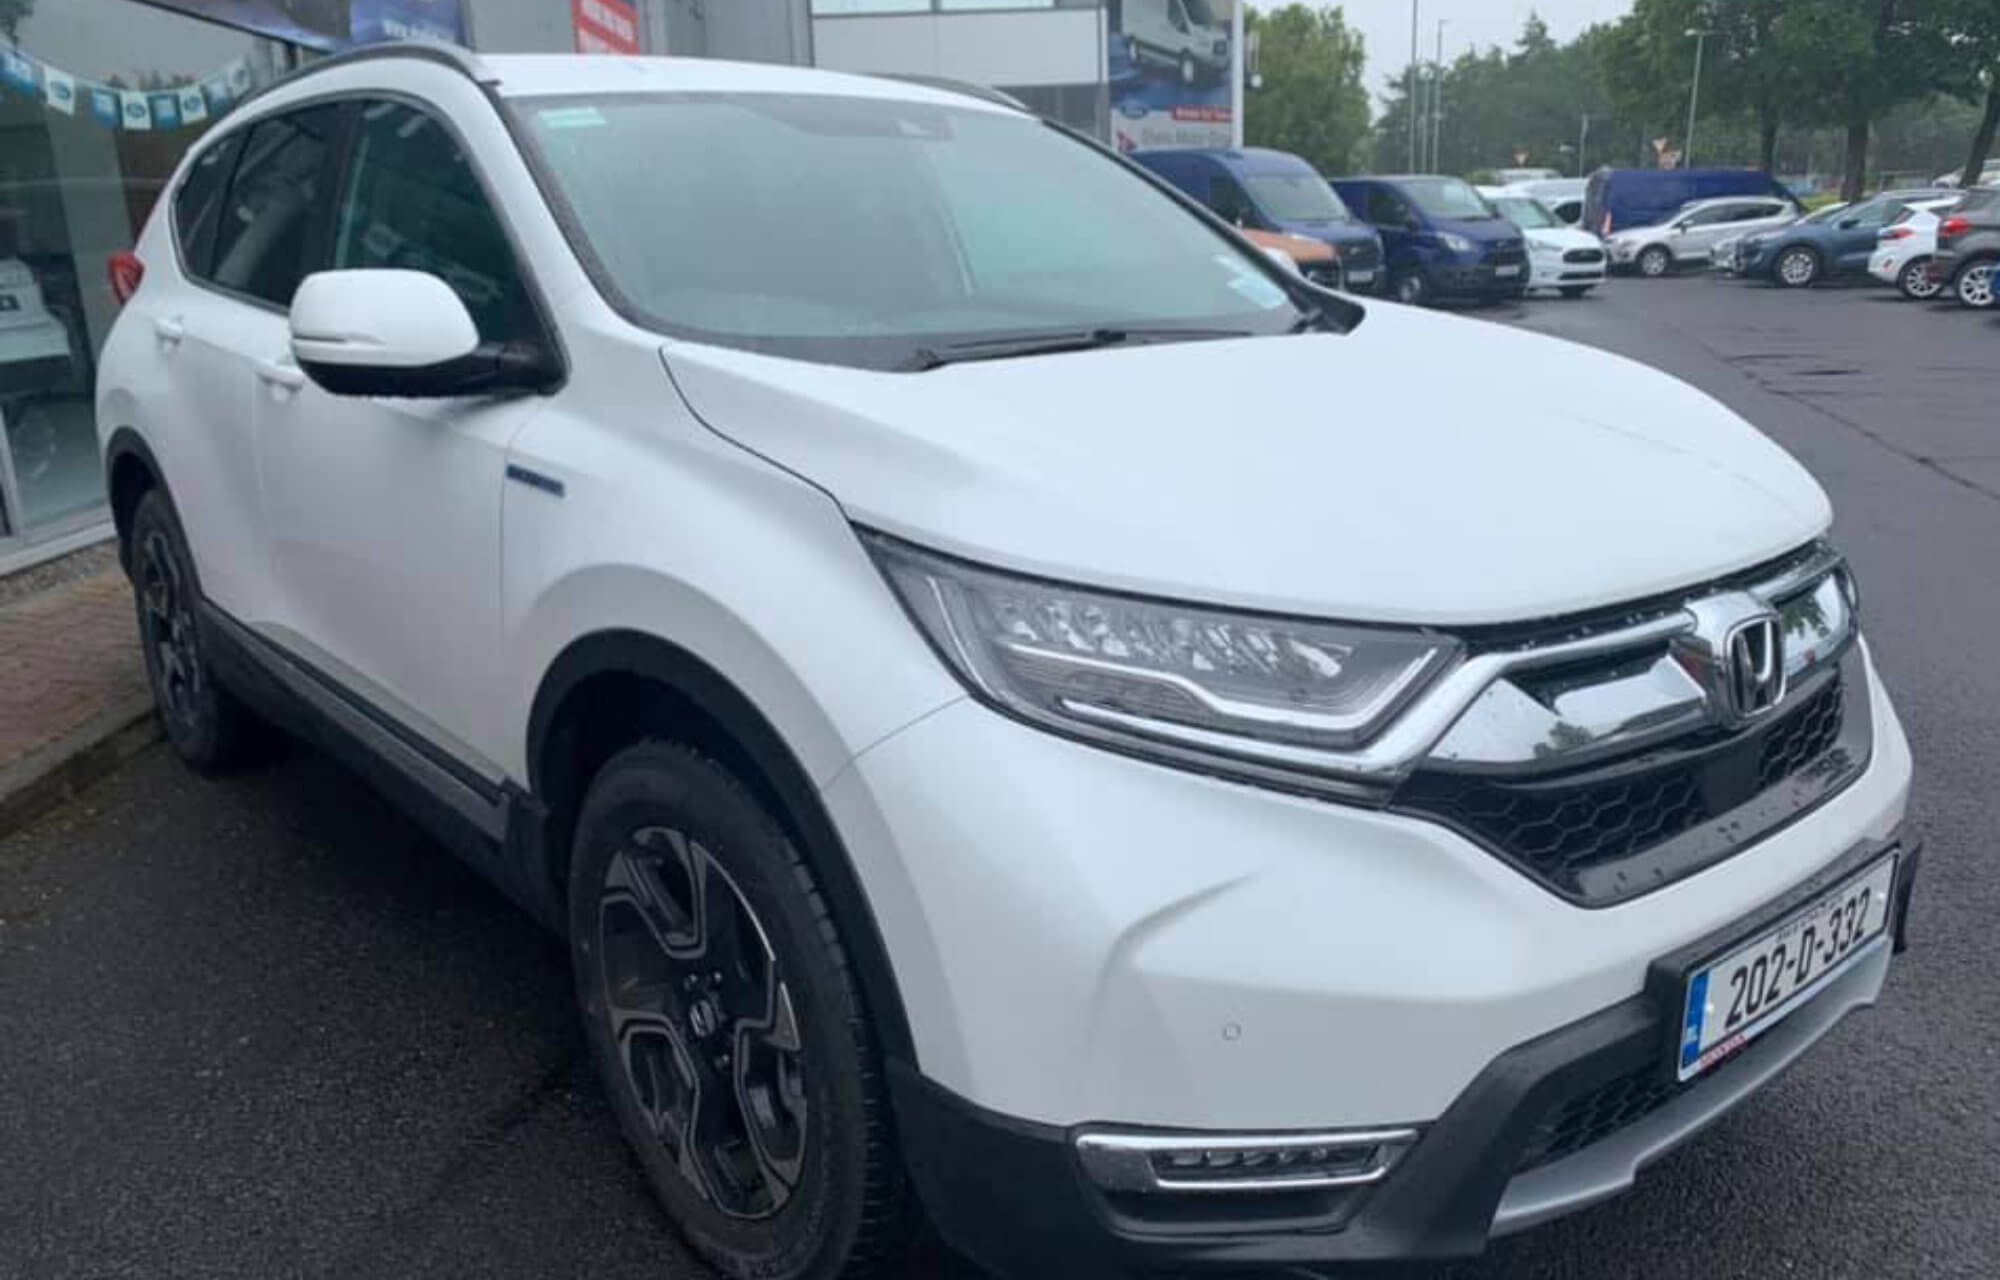 202 CR-V Hybrid 2.0 i-MMD available for test drives at Sheils Galway until Saturday 11th July